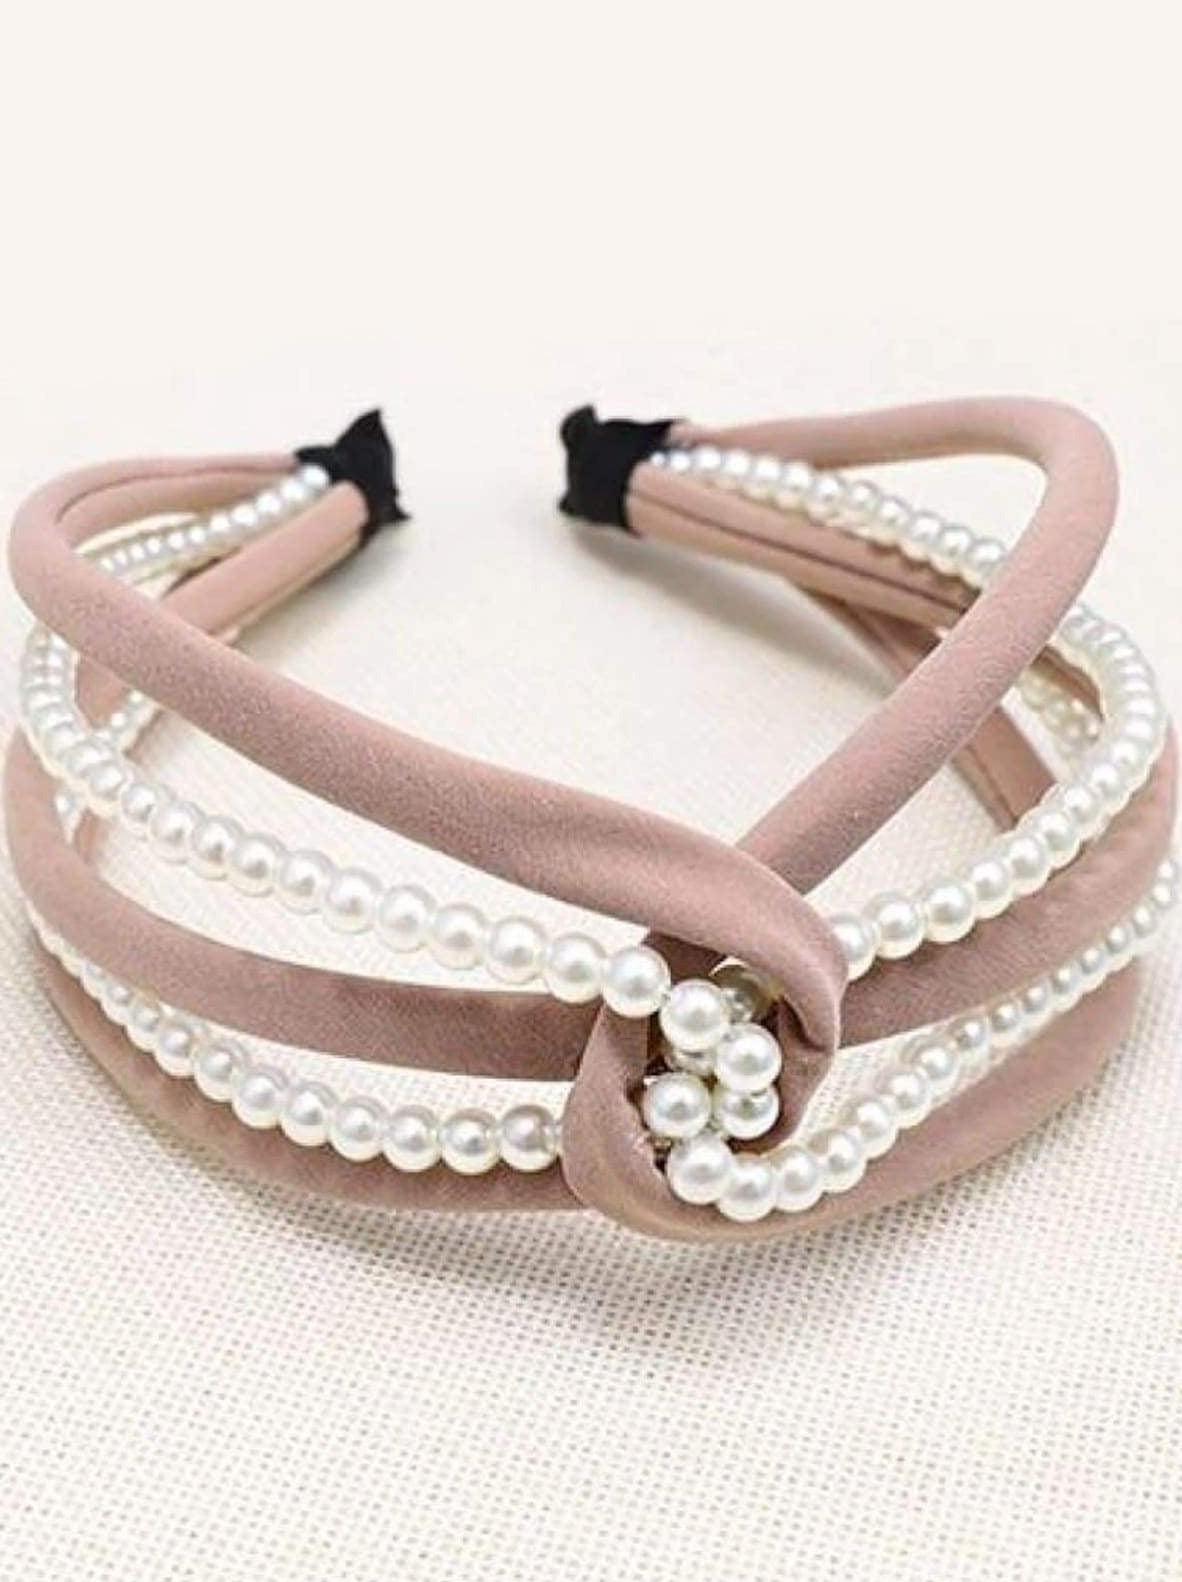 Girls Pearl and Velvet Knot Headband - Pink - Hair Accessories